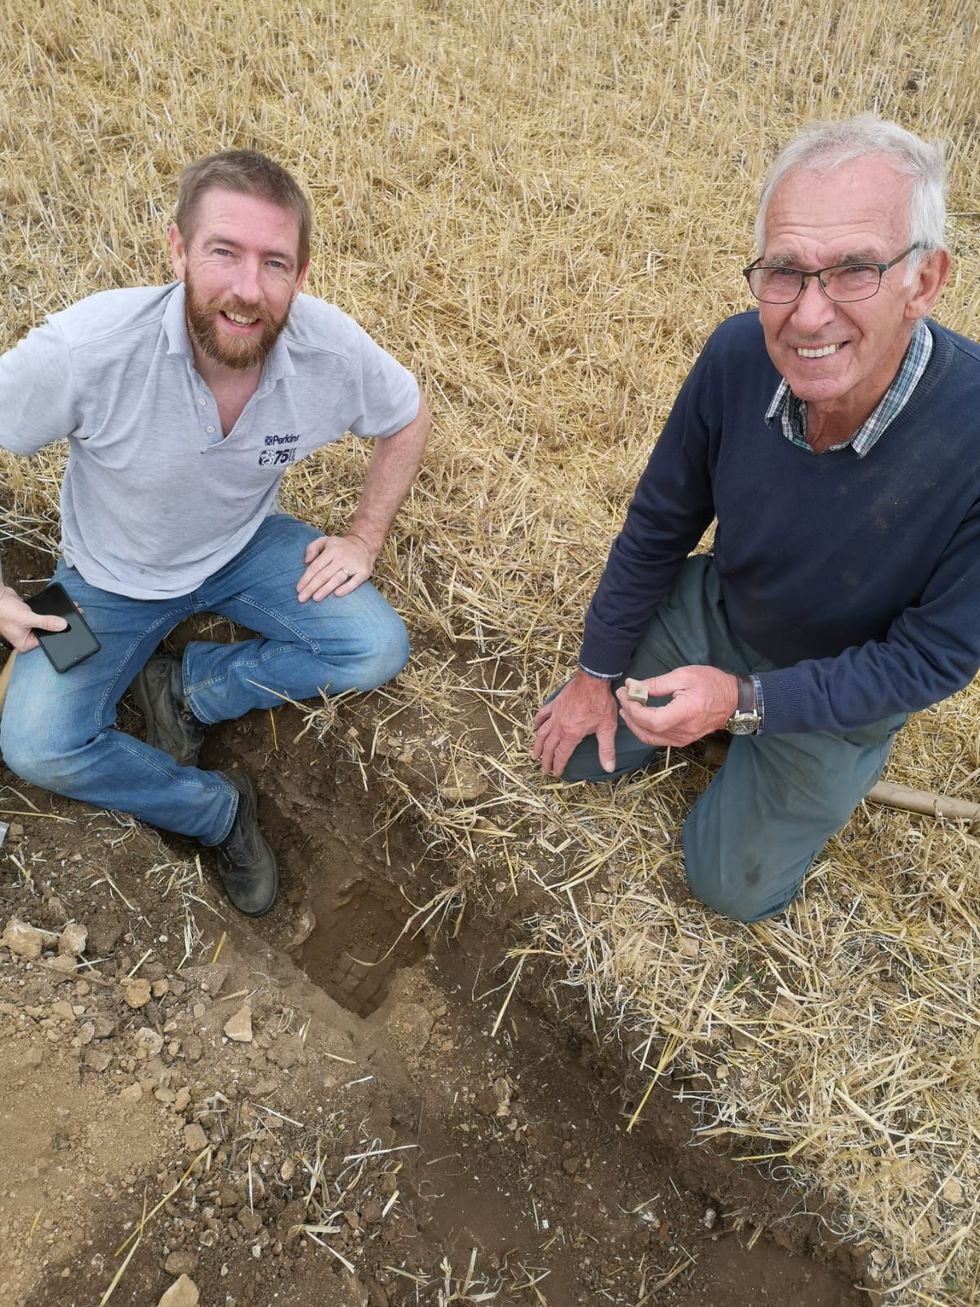 Jim Irvine, who discovered the site, with his father Brian Naylor, who owns the land on which the mosaic was found. (University of Leicester Archaeological Services/PA)